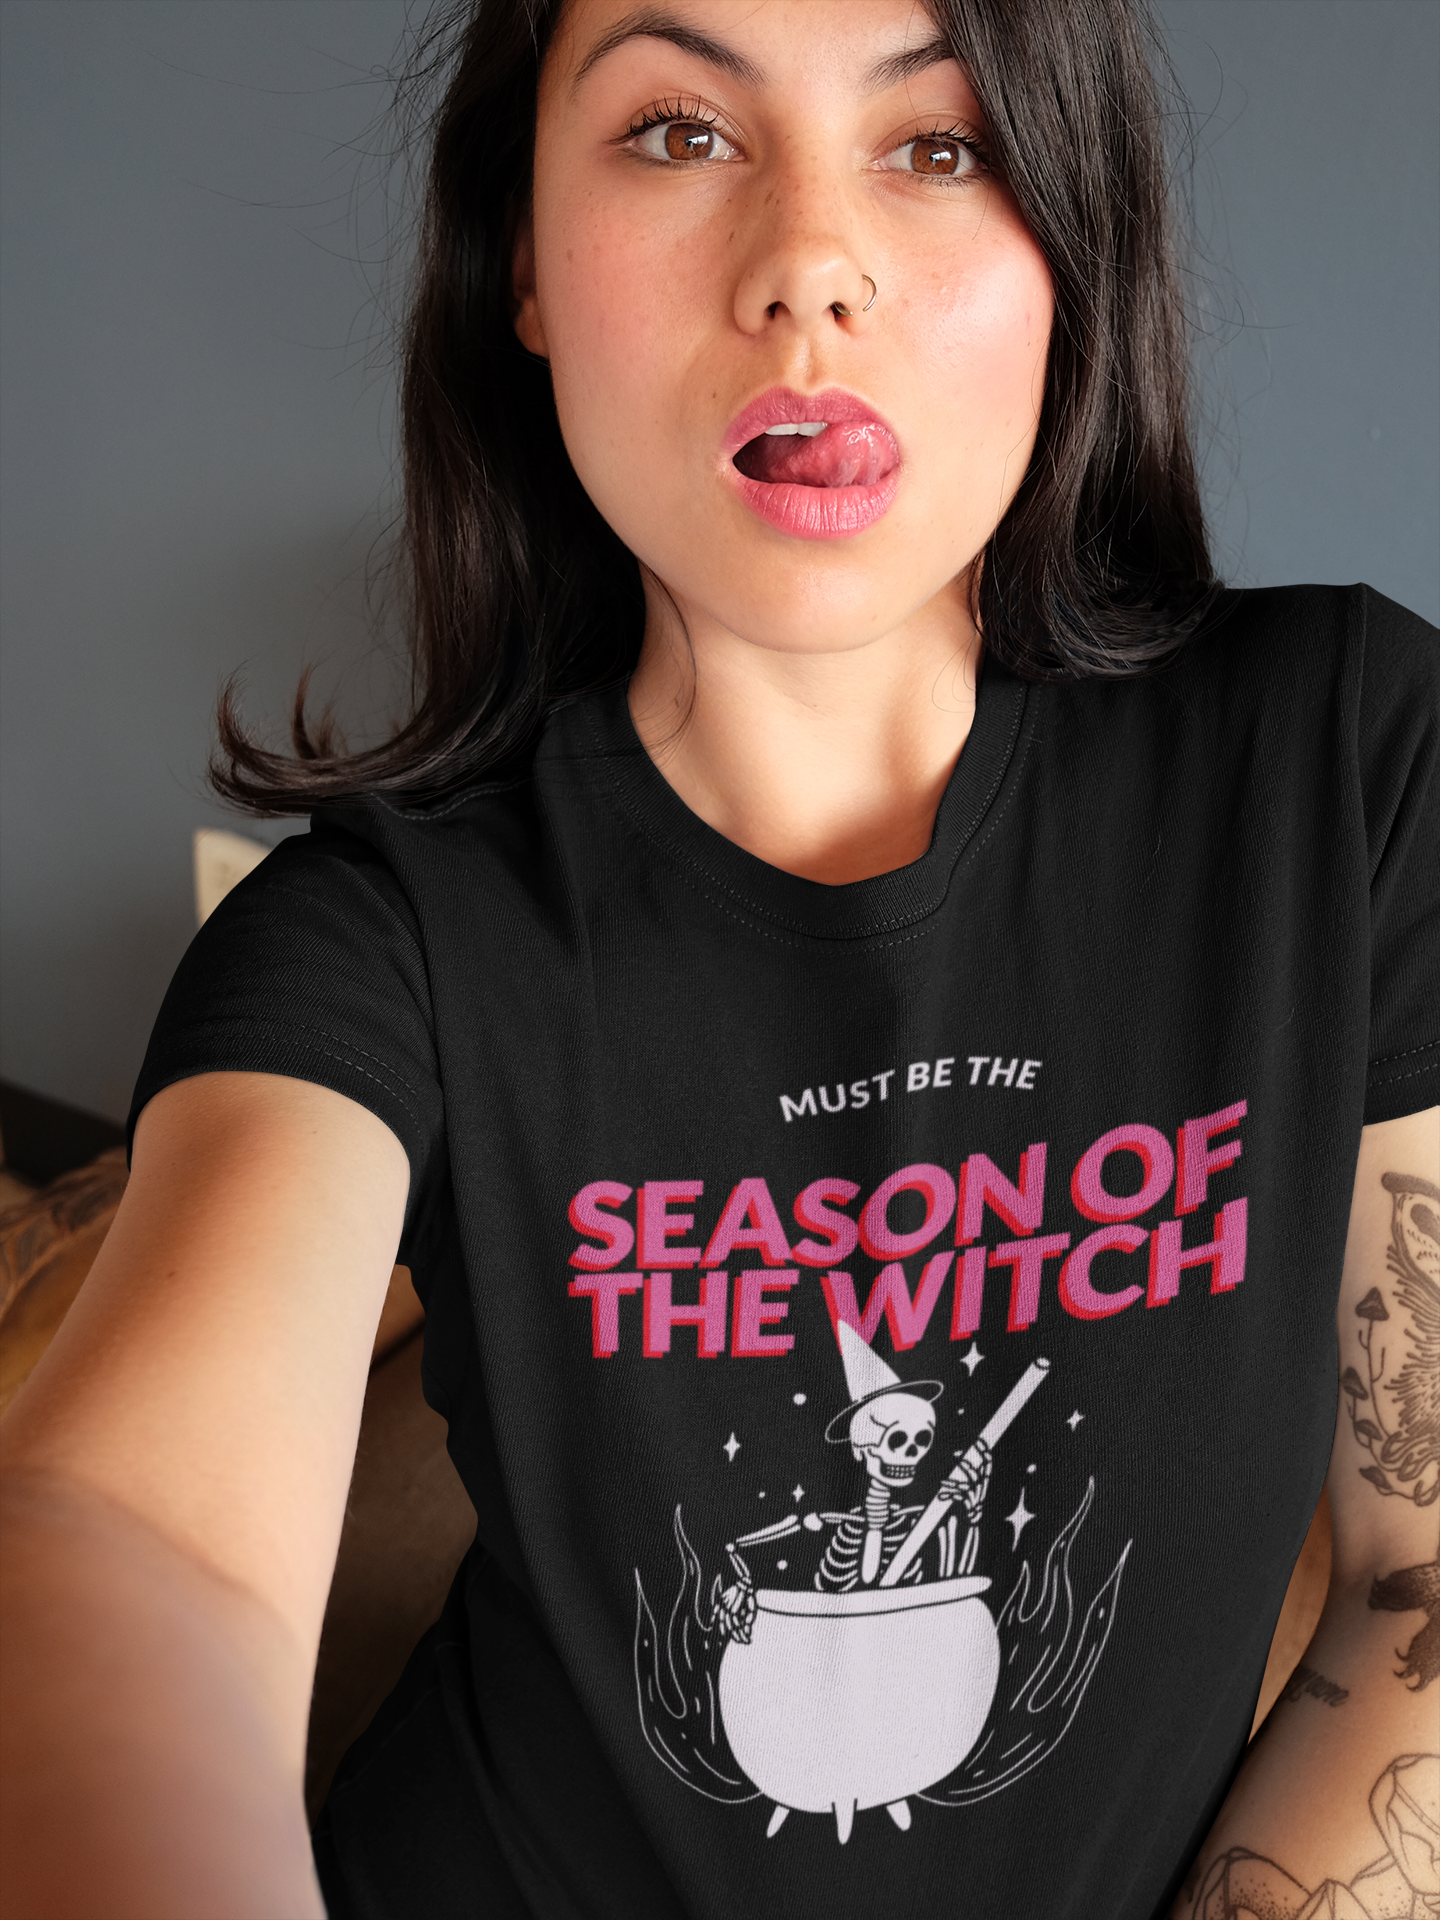 MUST BE THE SEASON OF THE WITCH